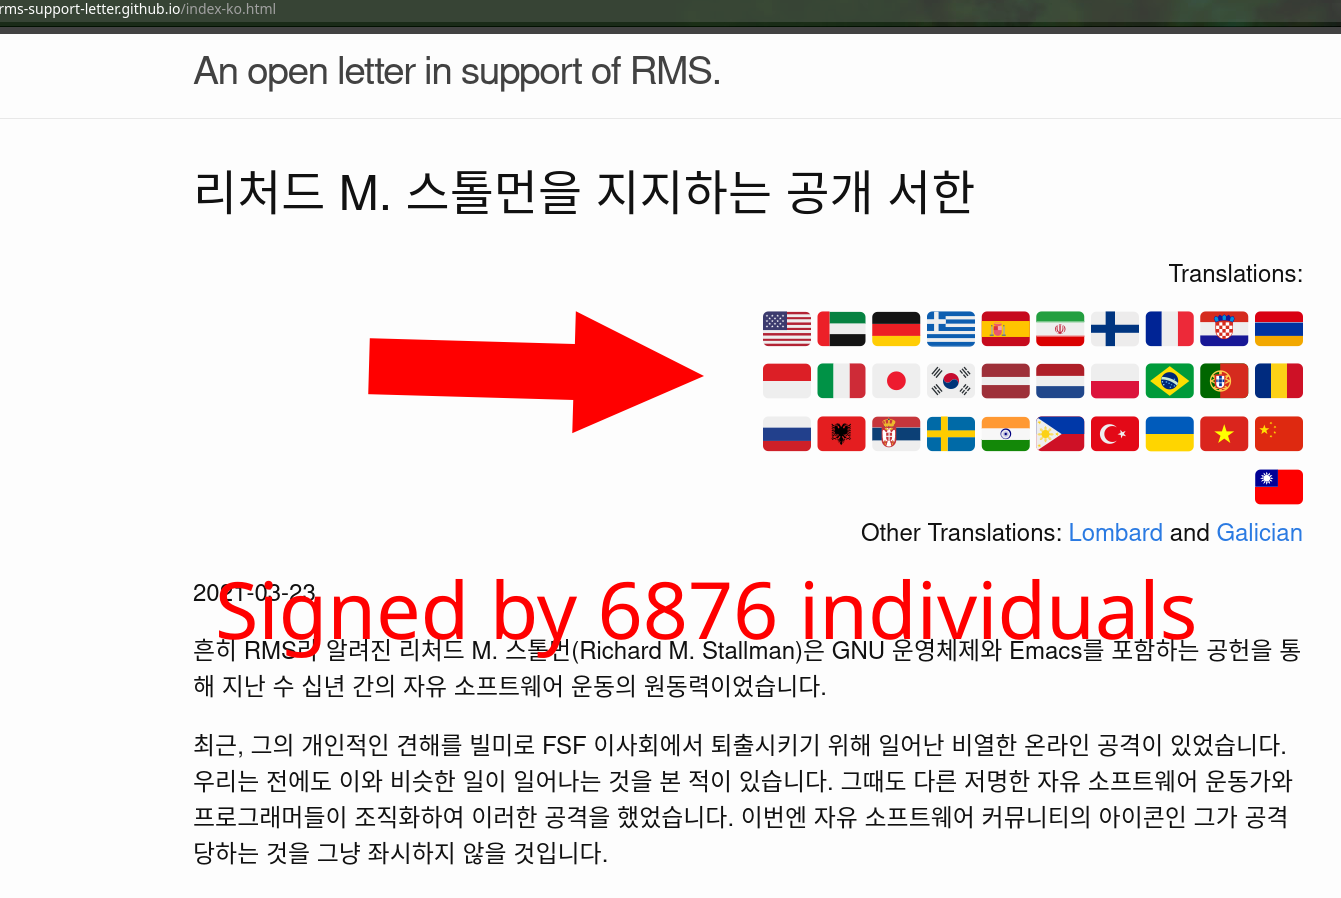 An open letter in support of RMS. Signed by 6876 individuals